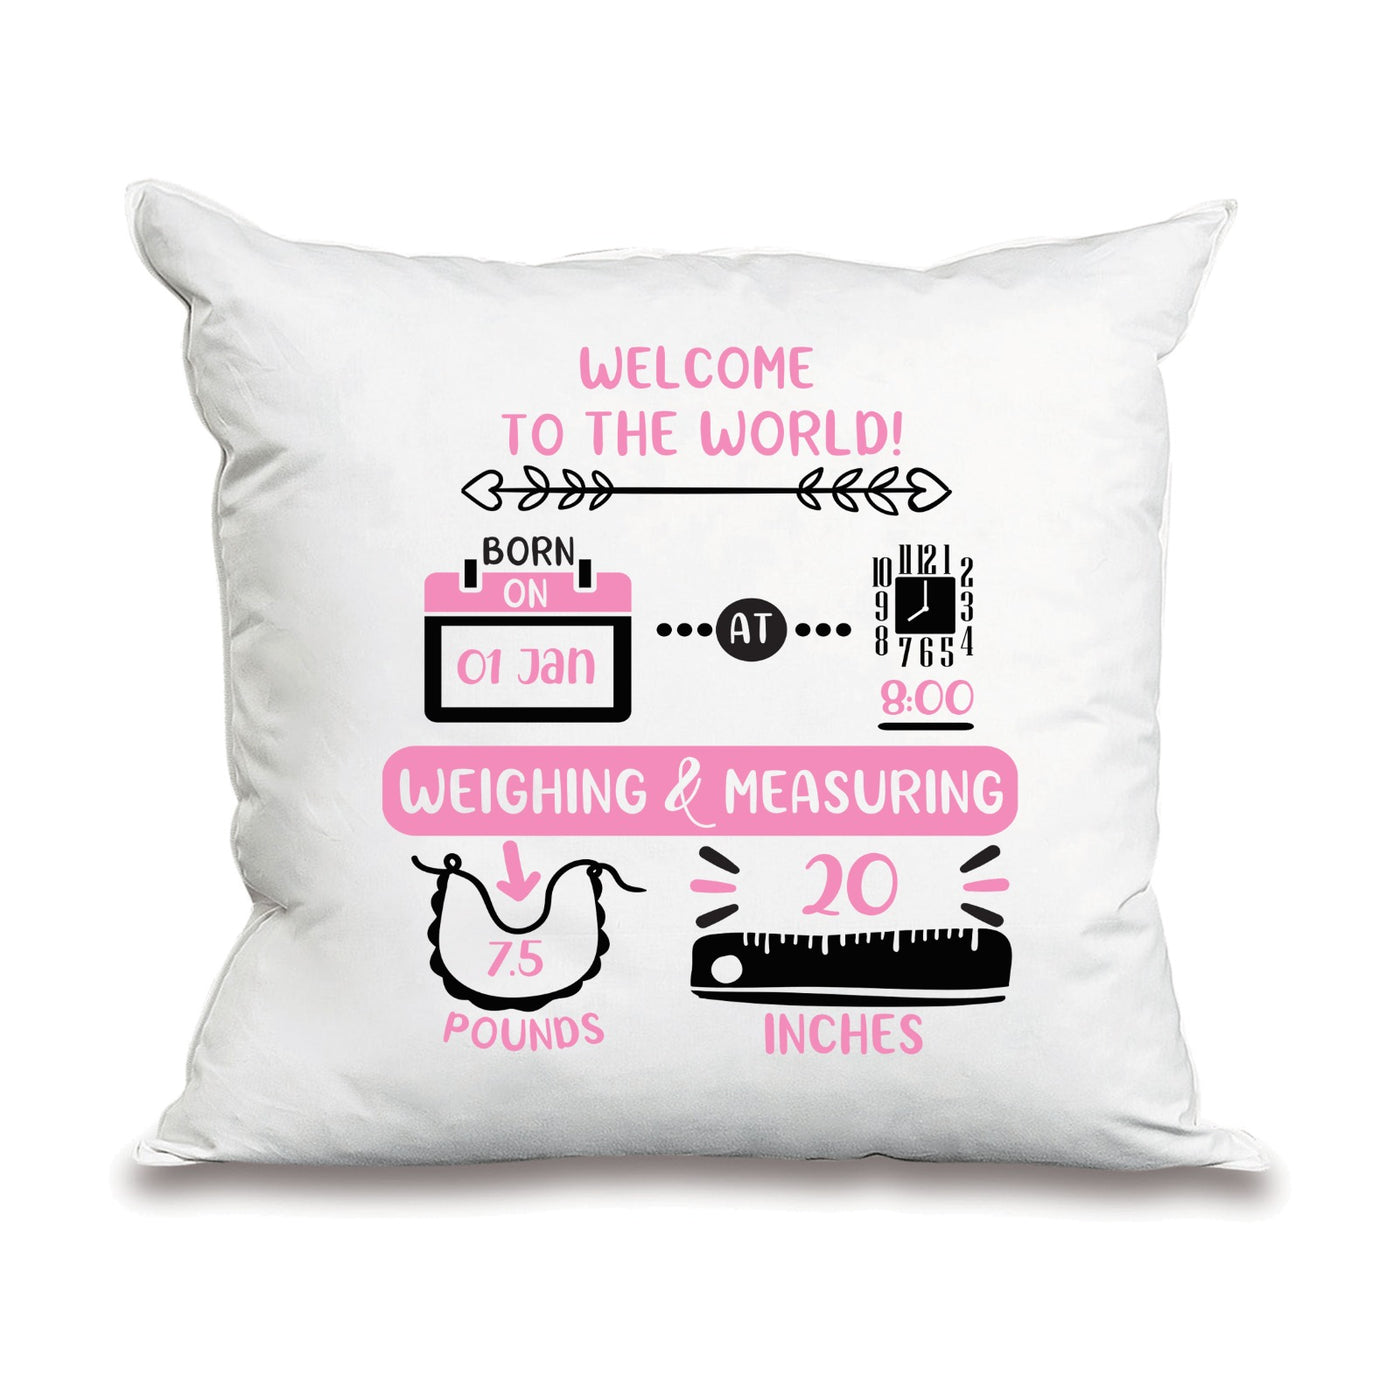 WELCOME TO THE WORLD NEW BORN BABY CUSHION GIRL